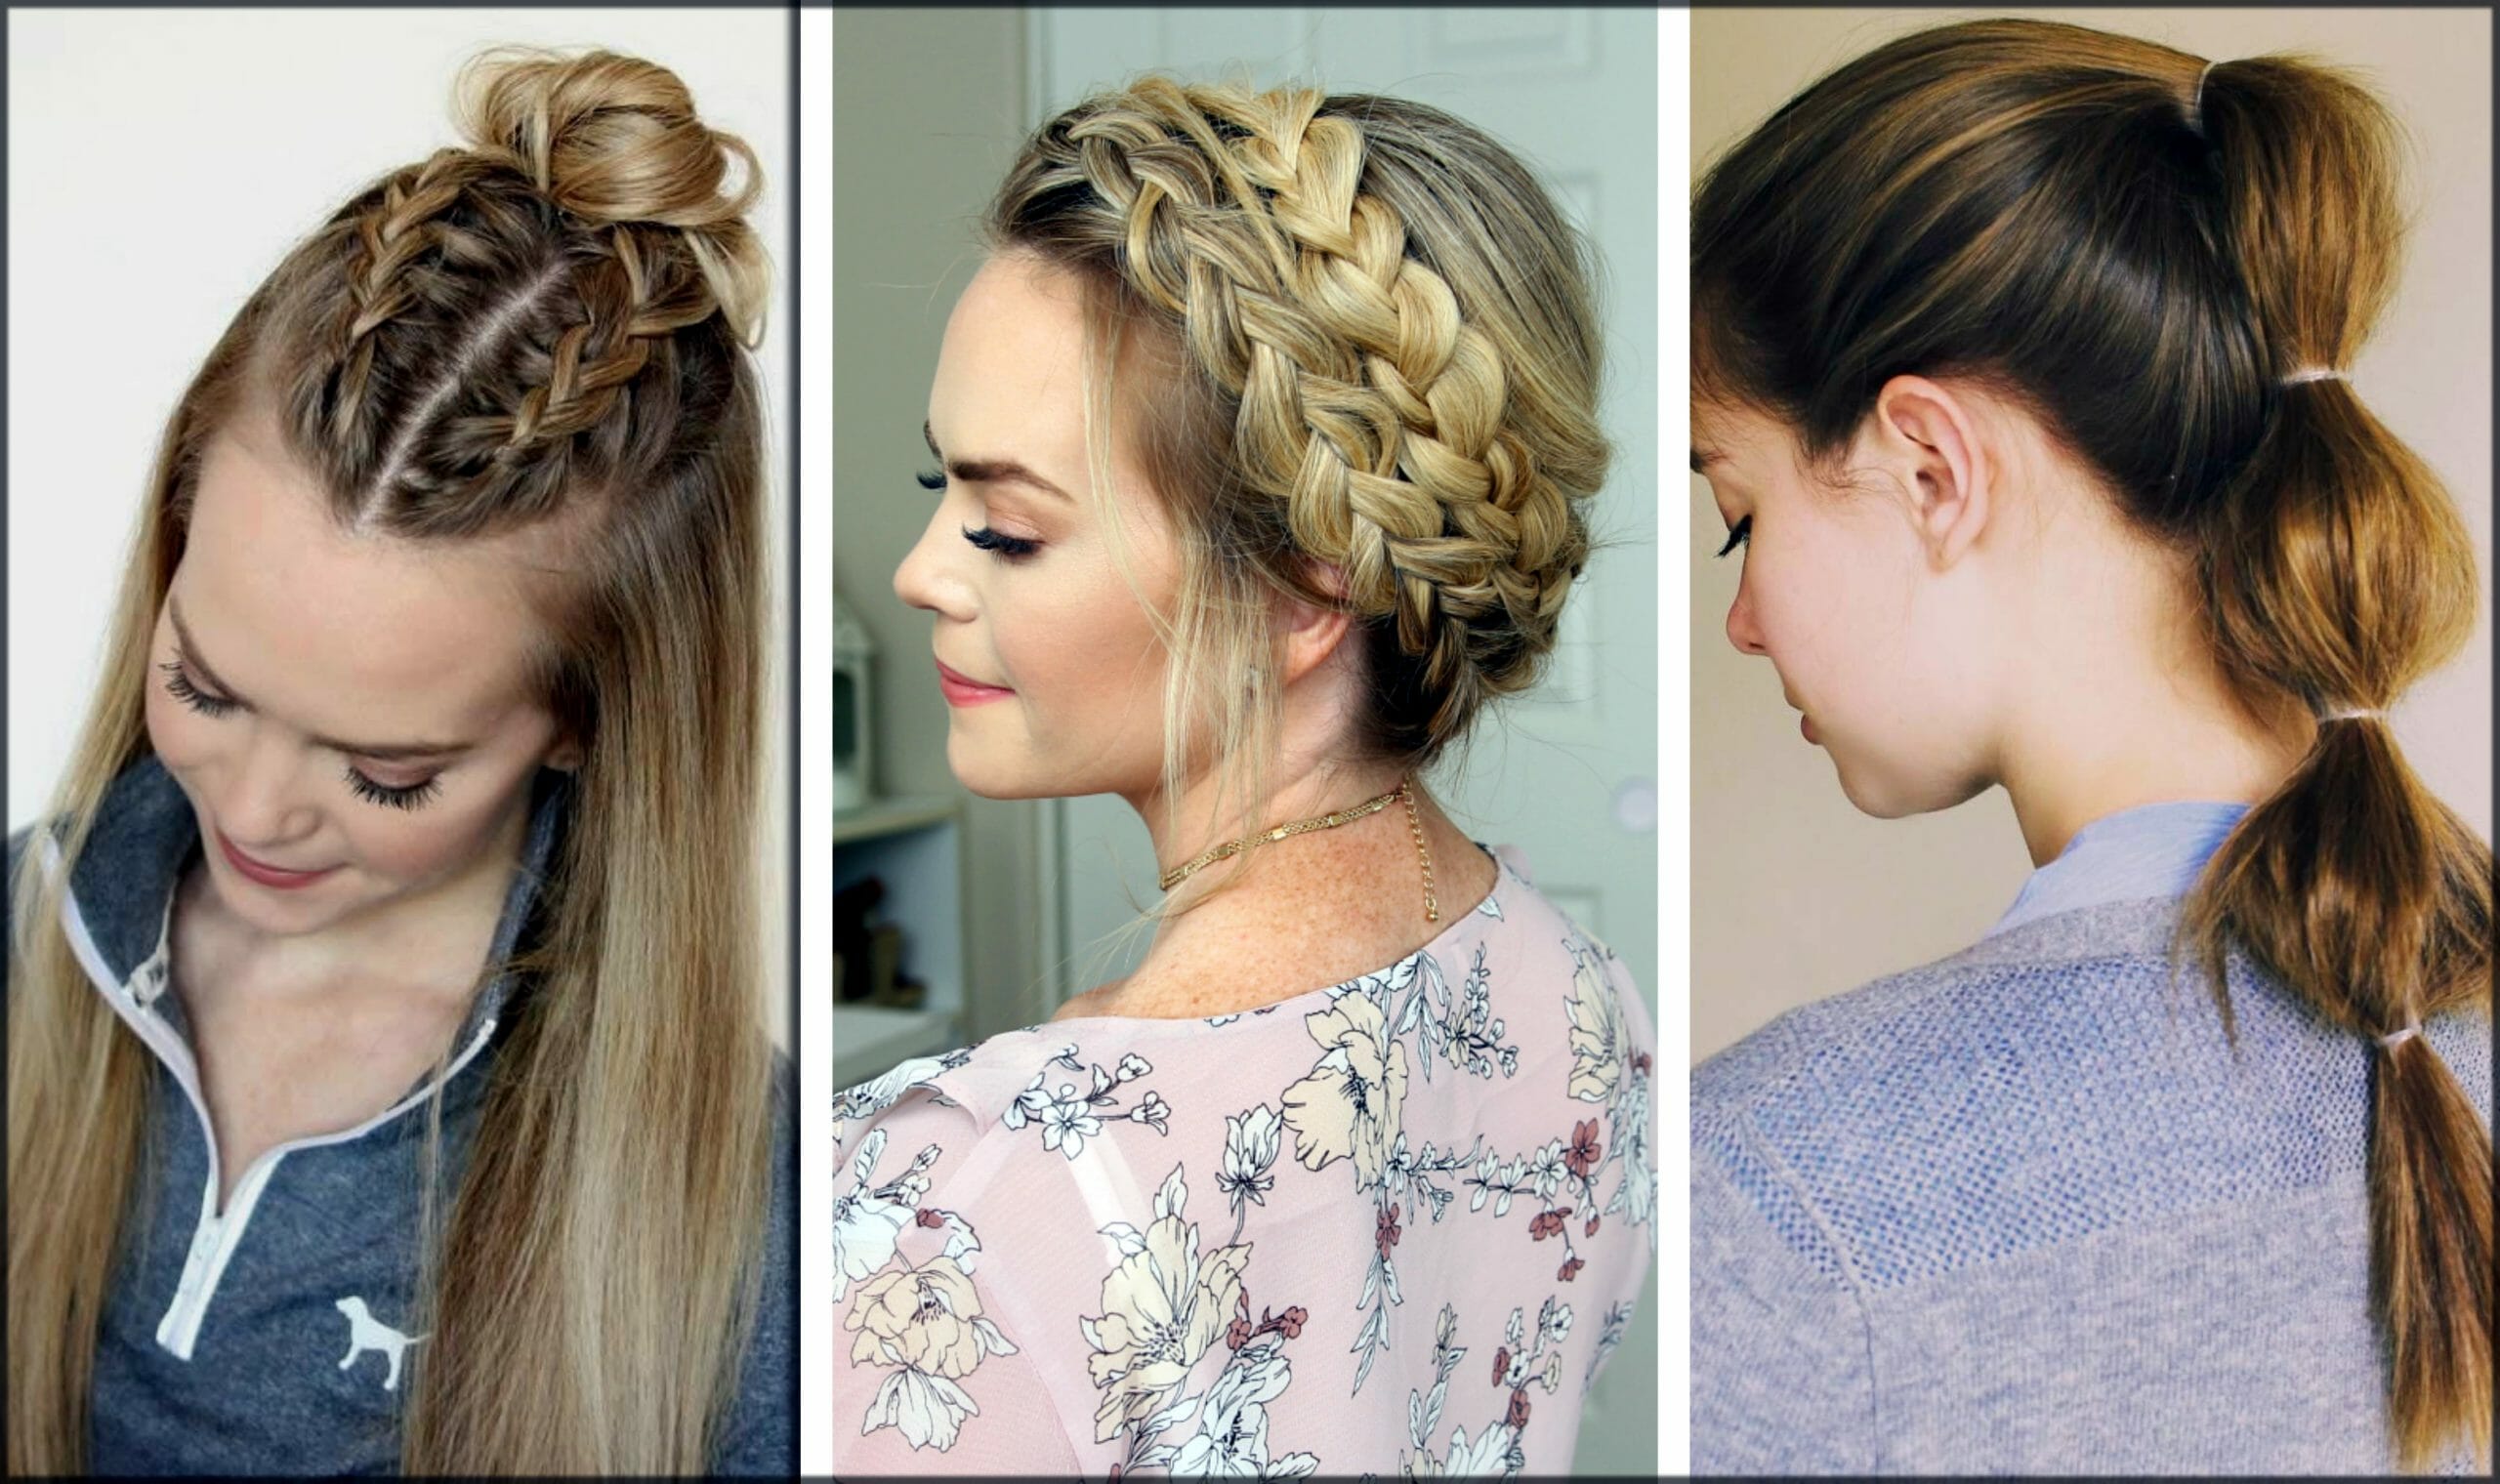 7 Super Easy Hairstyles for Girls Got You Covered for the Week  Stylish  Life for Moms